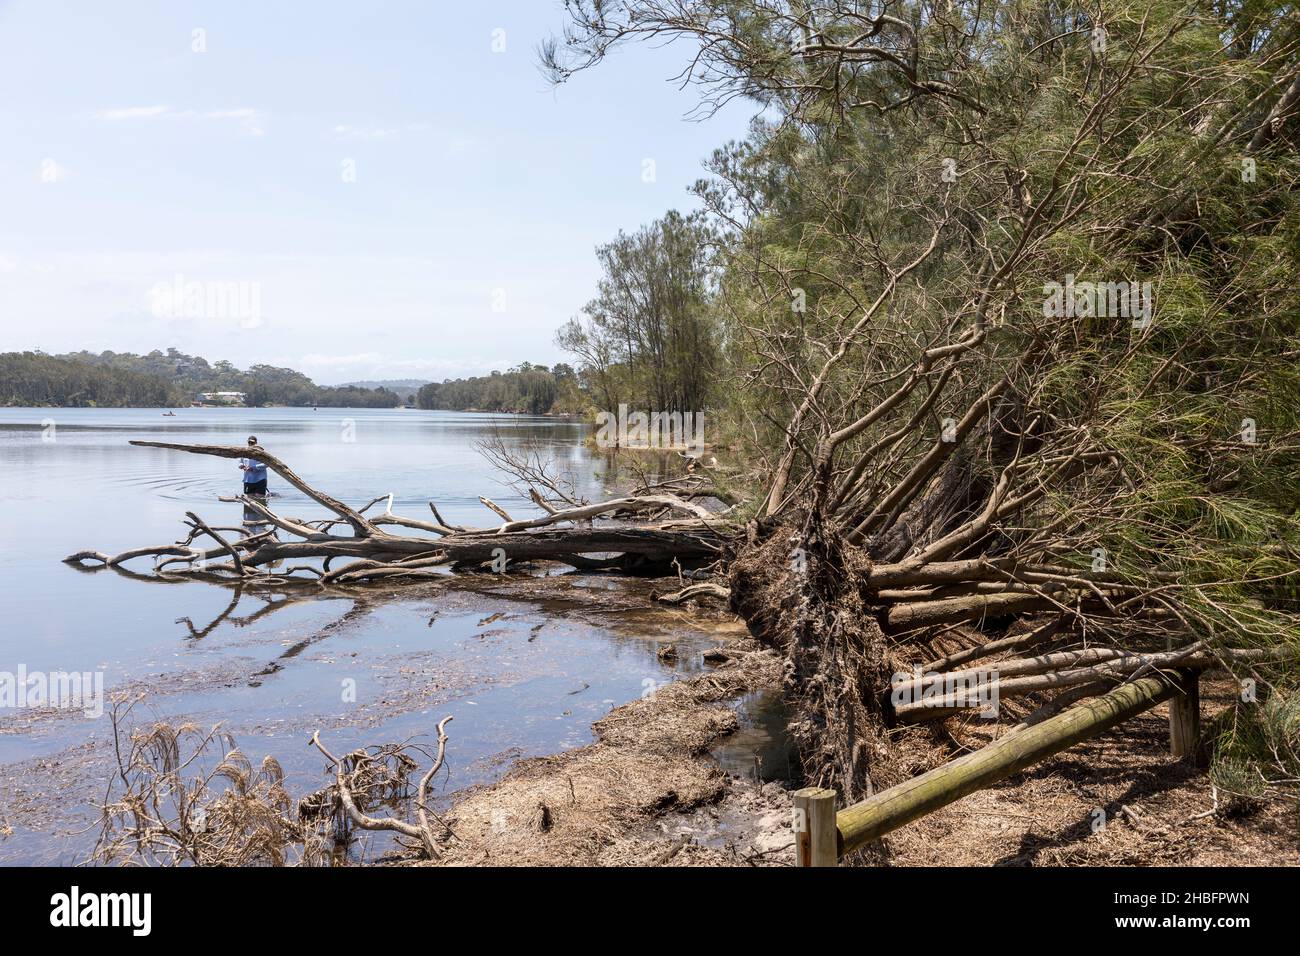 Day after freak storm damaged trees at Narrabeen lake, man fishes beside an uprooted tree,Sydney,Australia December 2021 Stock Photo